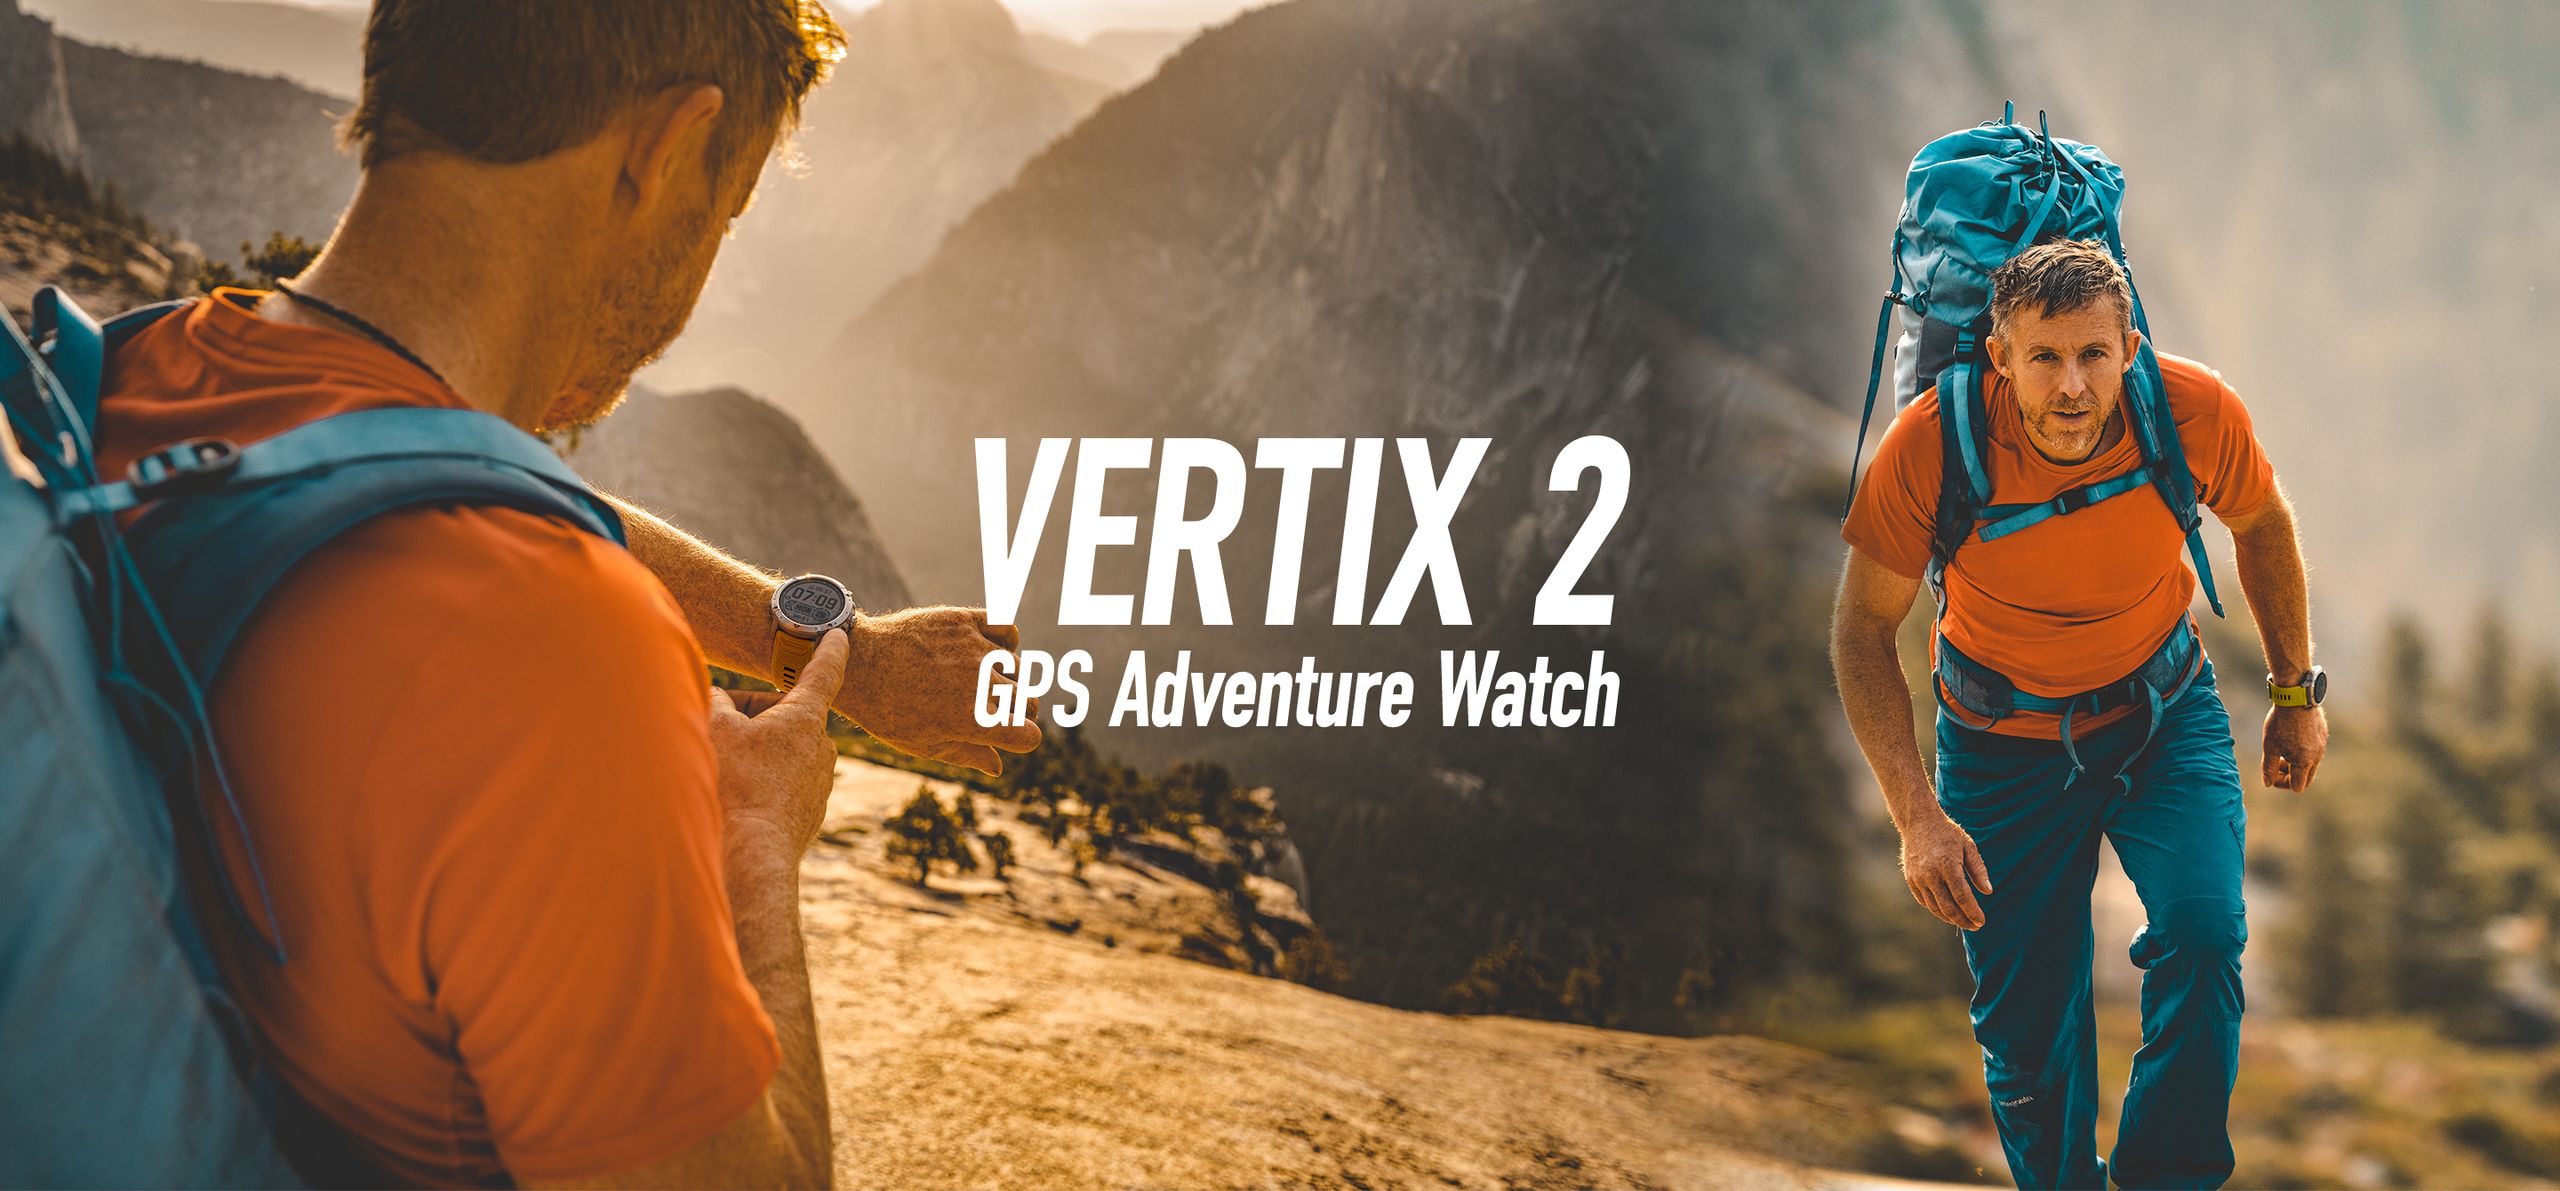 Image of Tommy Caldwell wearing COROS VERTIX 2